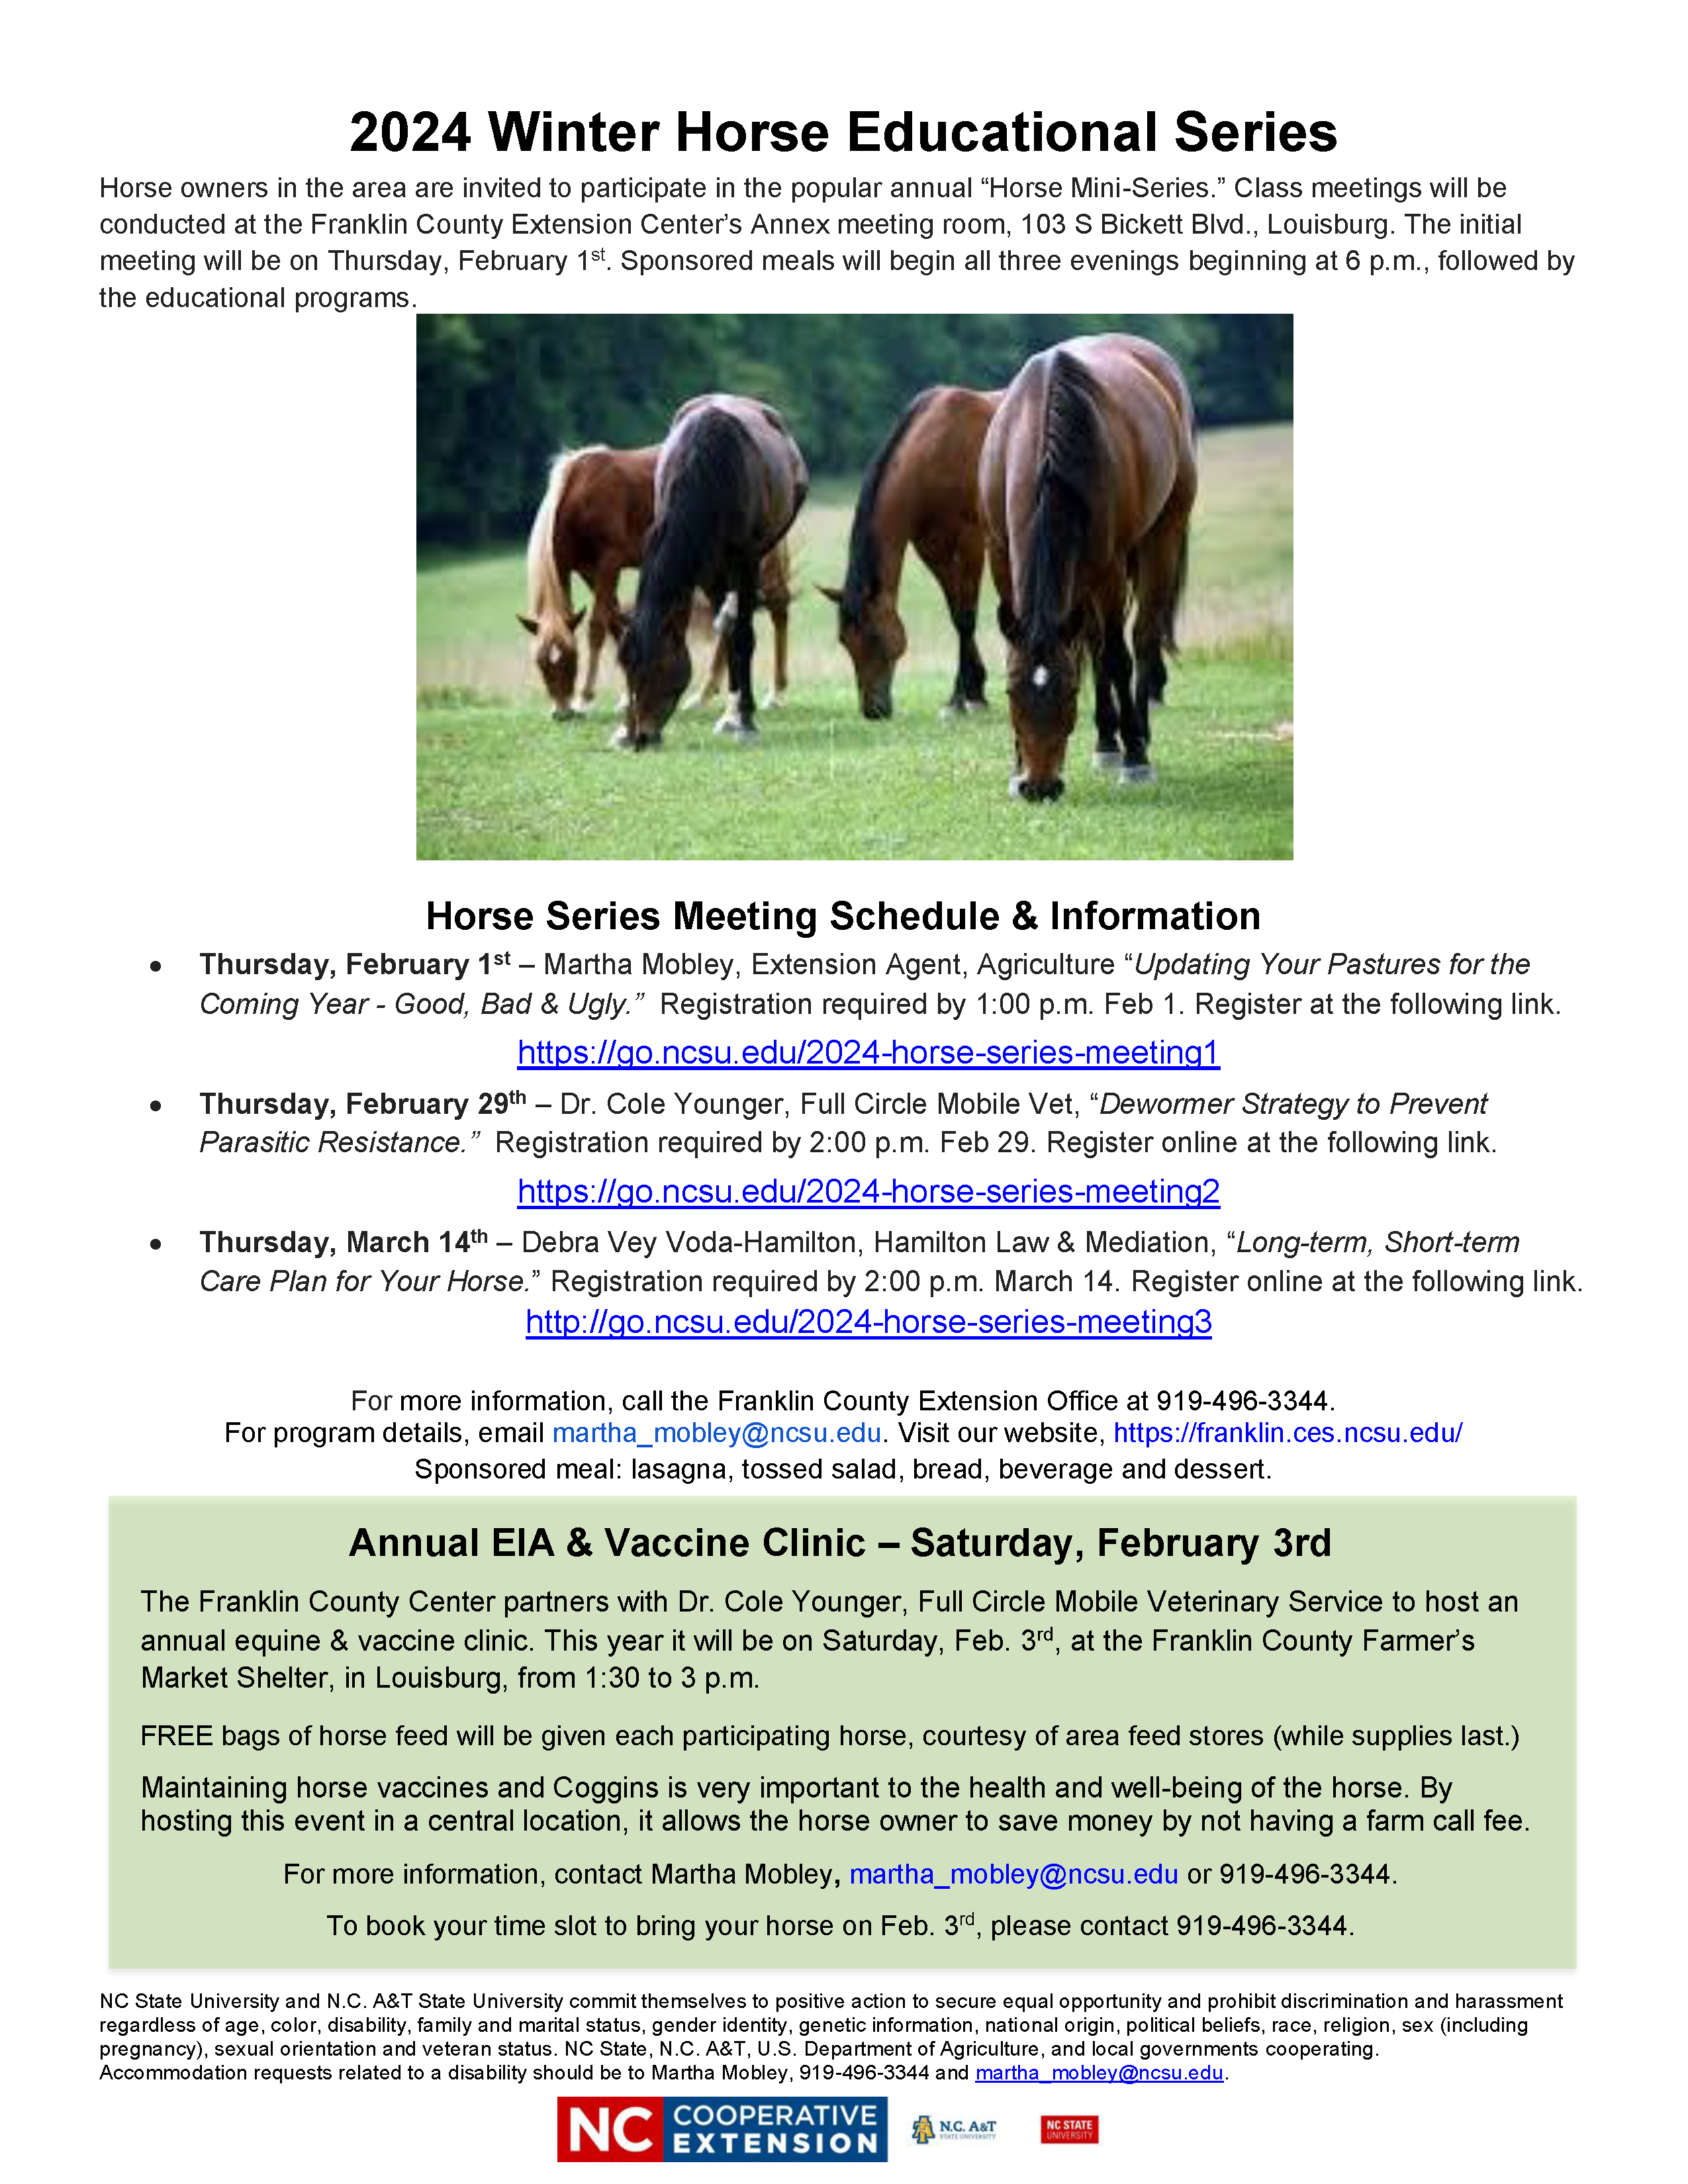 2024 Winter Horse Meeting Series and Coggins EIA clinic schedule, registration info, date, time, location, image of horses in pasture